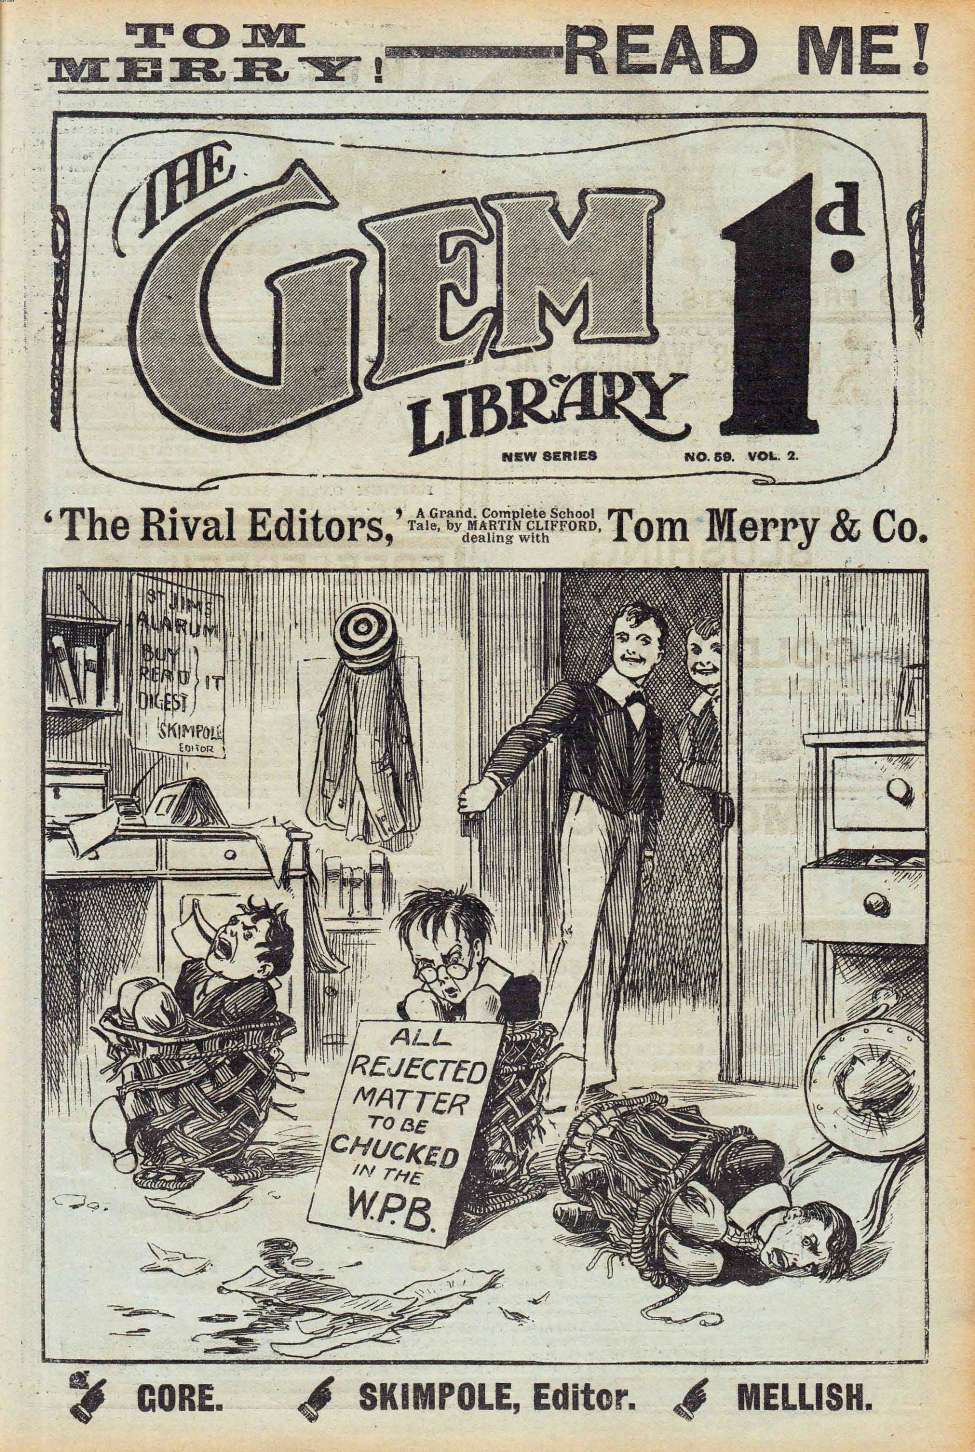 Book Cover For The Gem v2 59 - The Rival Editors